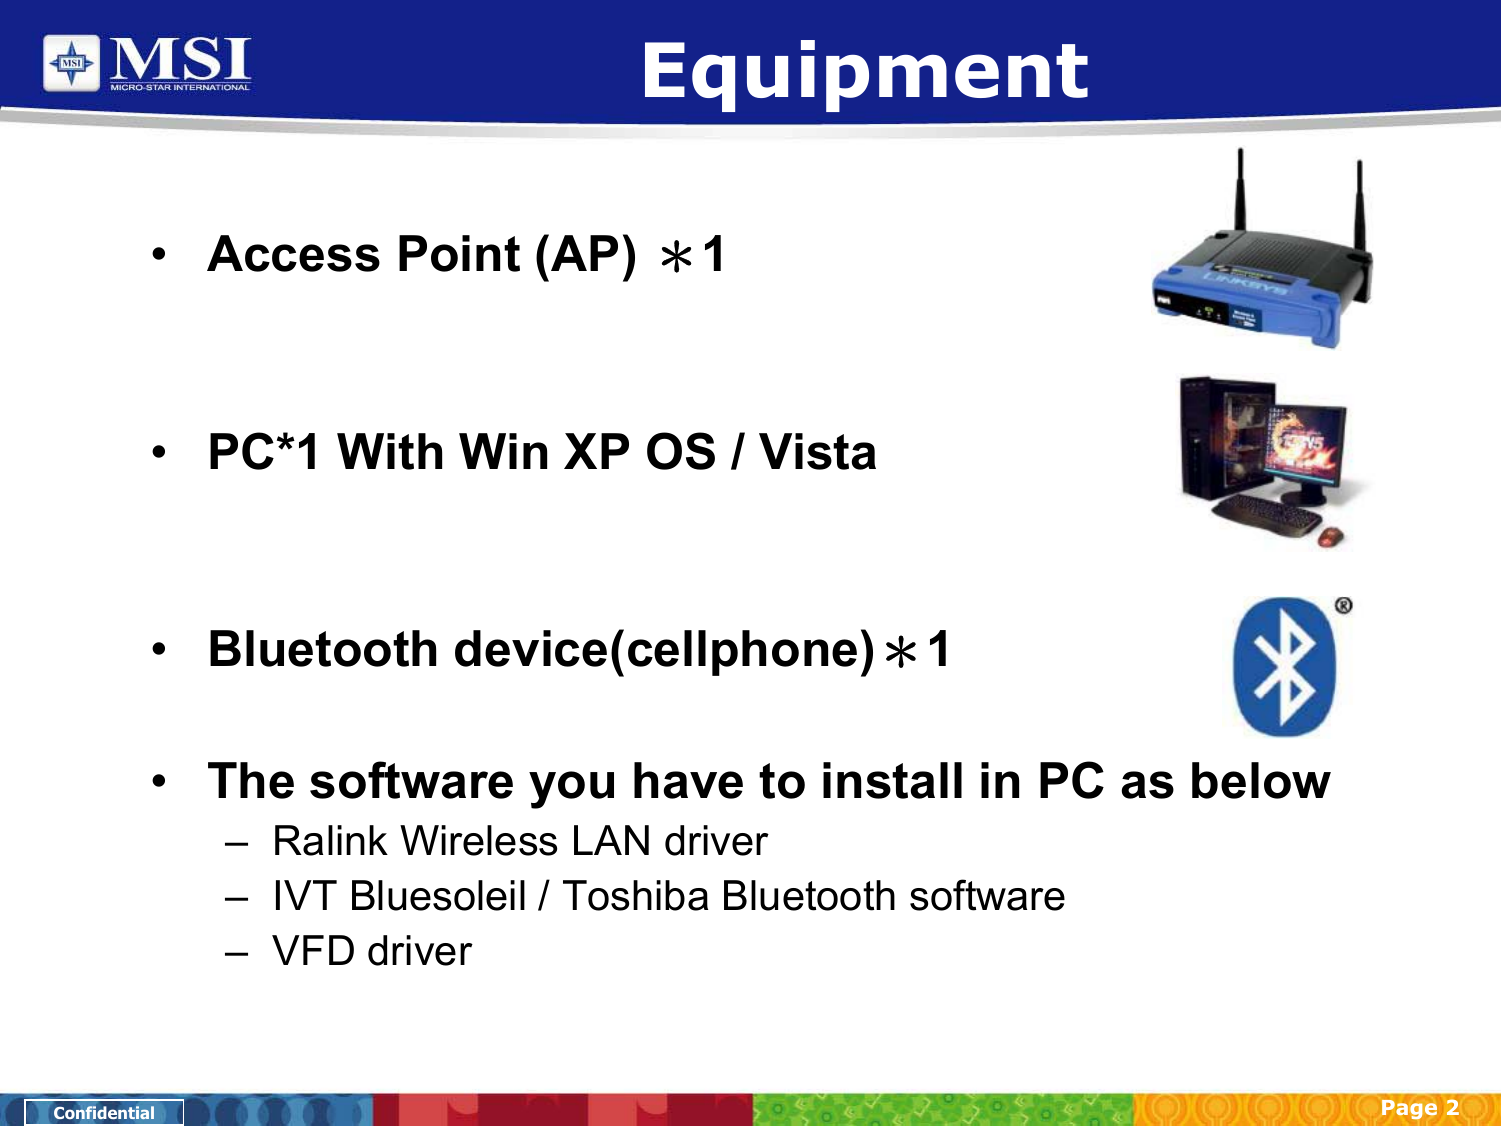 Page 2ConfidentialEquipment•Access Point (AP) ＊1•PC*1 With Win XP OS / Vista•Bluetooth device(cellphone)＊1•The software you have to install in PC as below– Ralink Wireless LAN driver– IVT Bluesoleil / Toshiba Bluetooth software–VFD driver